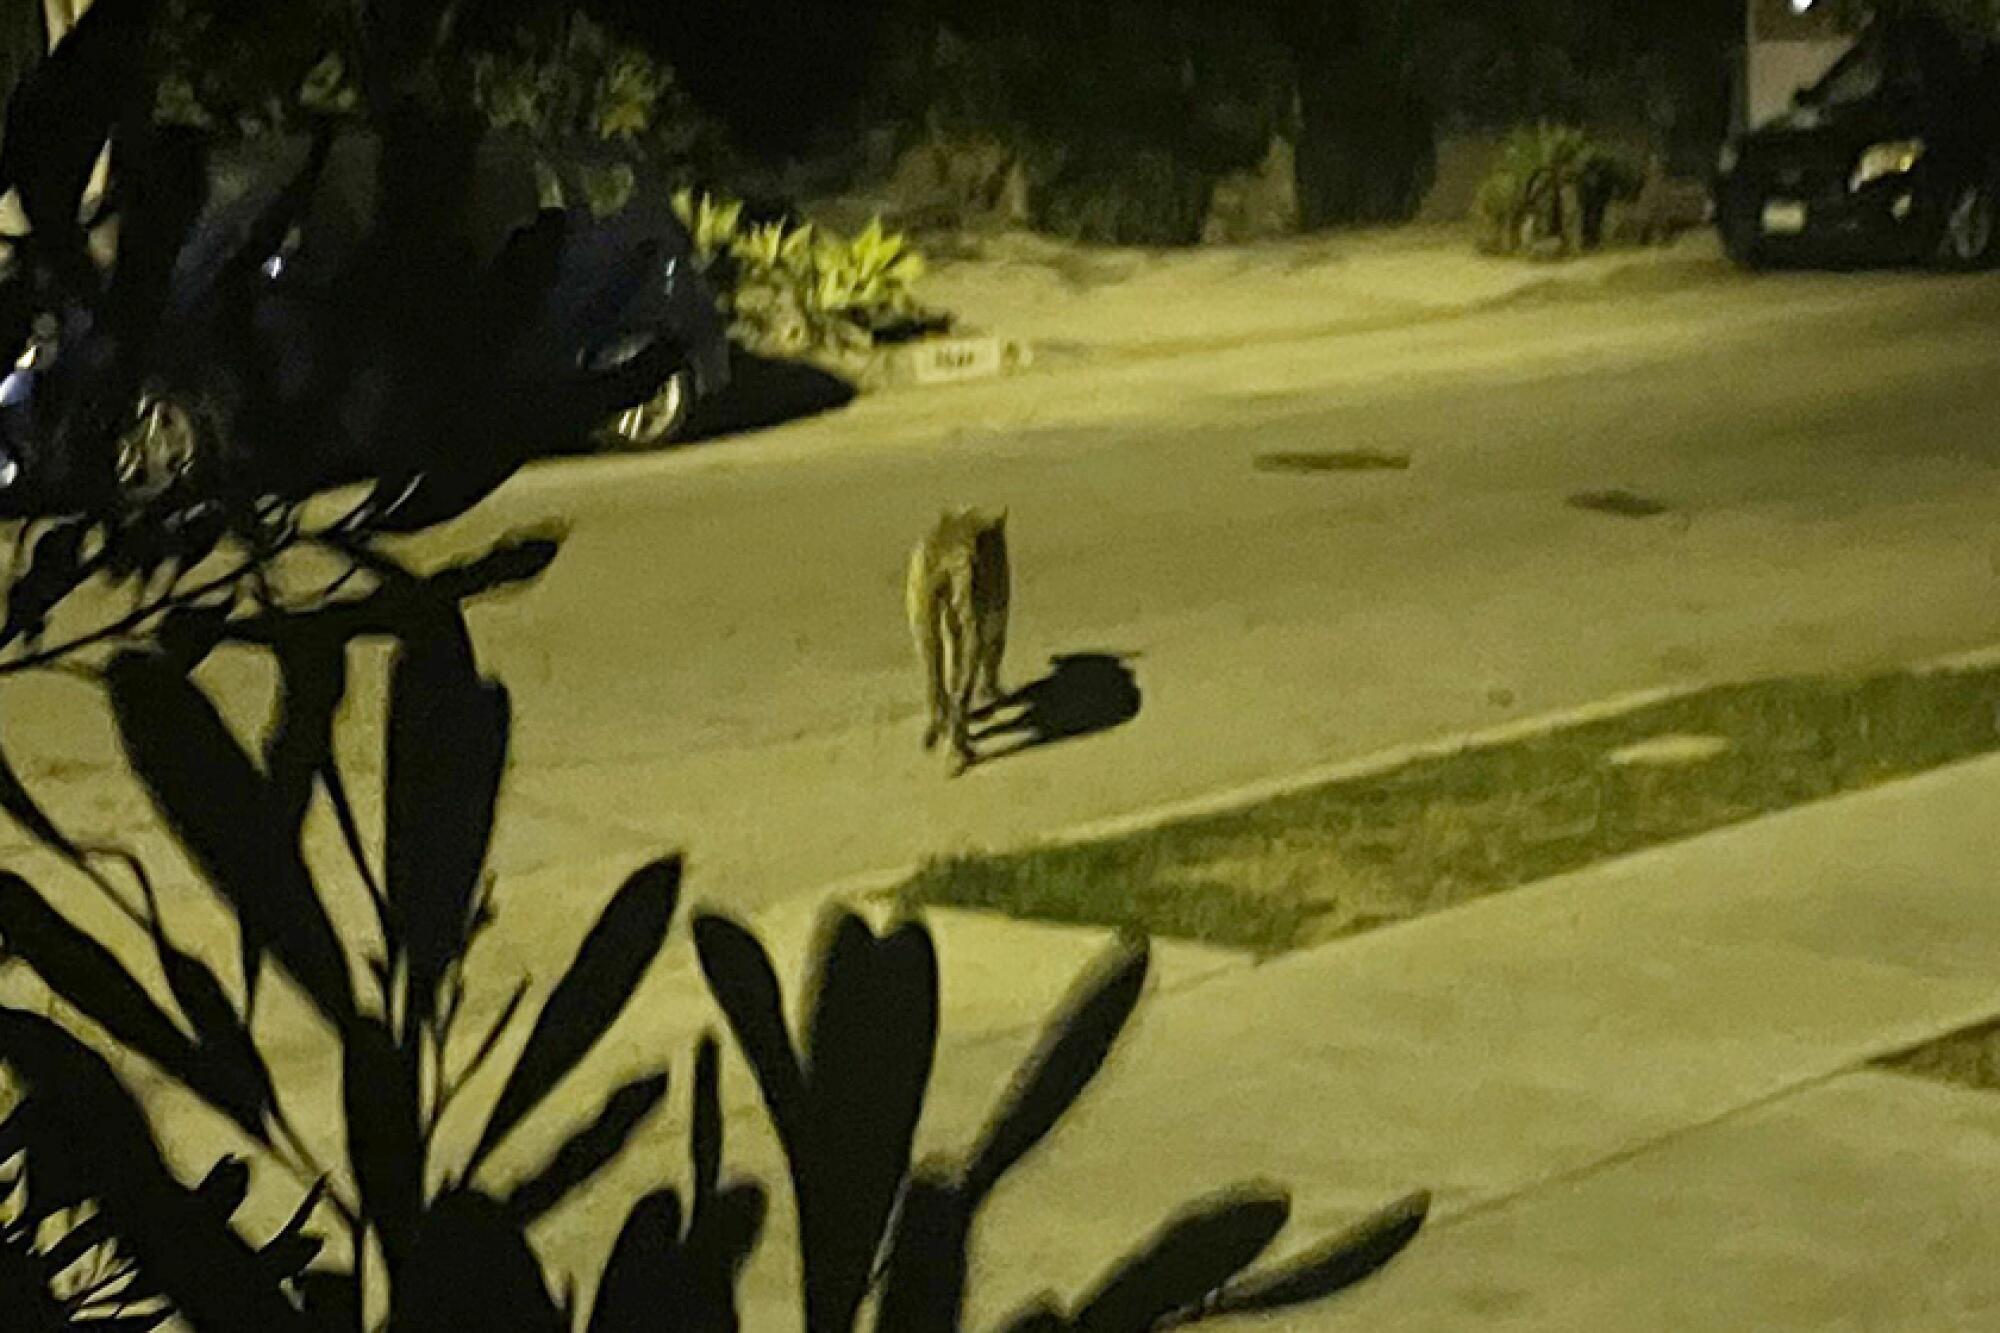 A mountain lion crosses a street at night near parked cars.